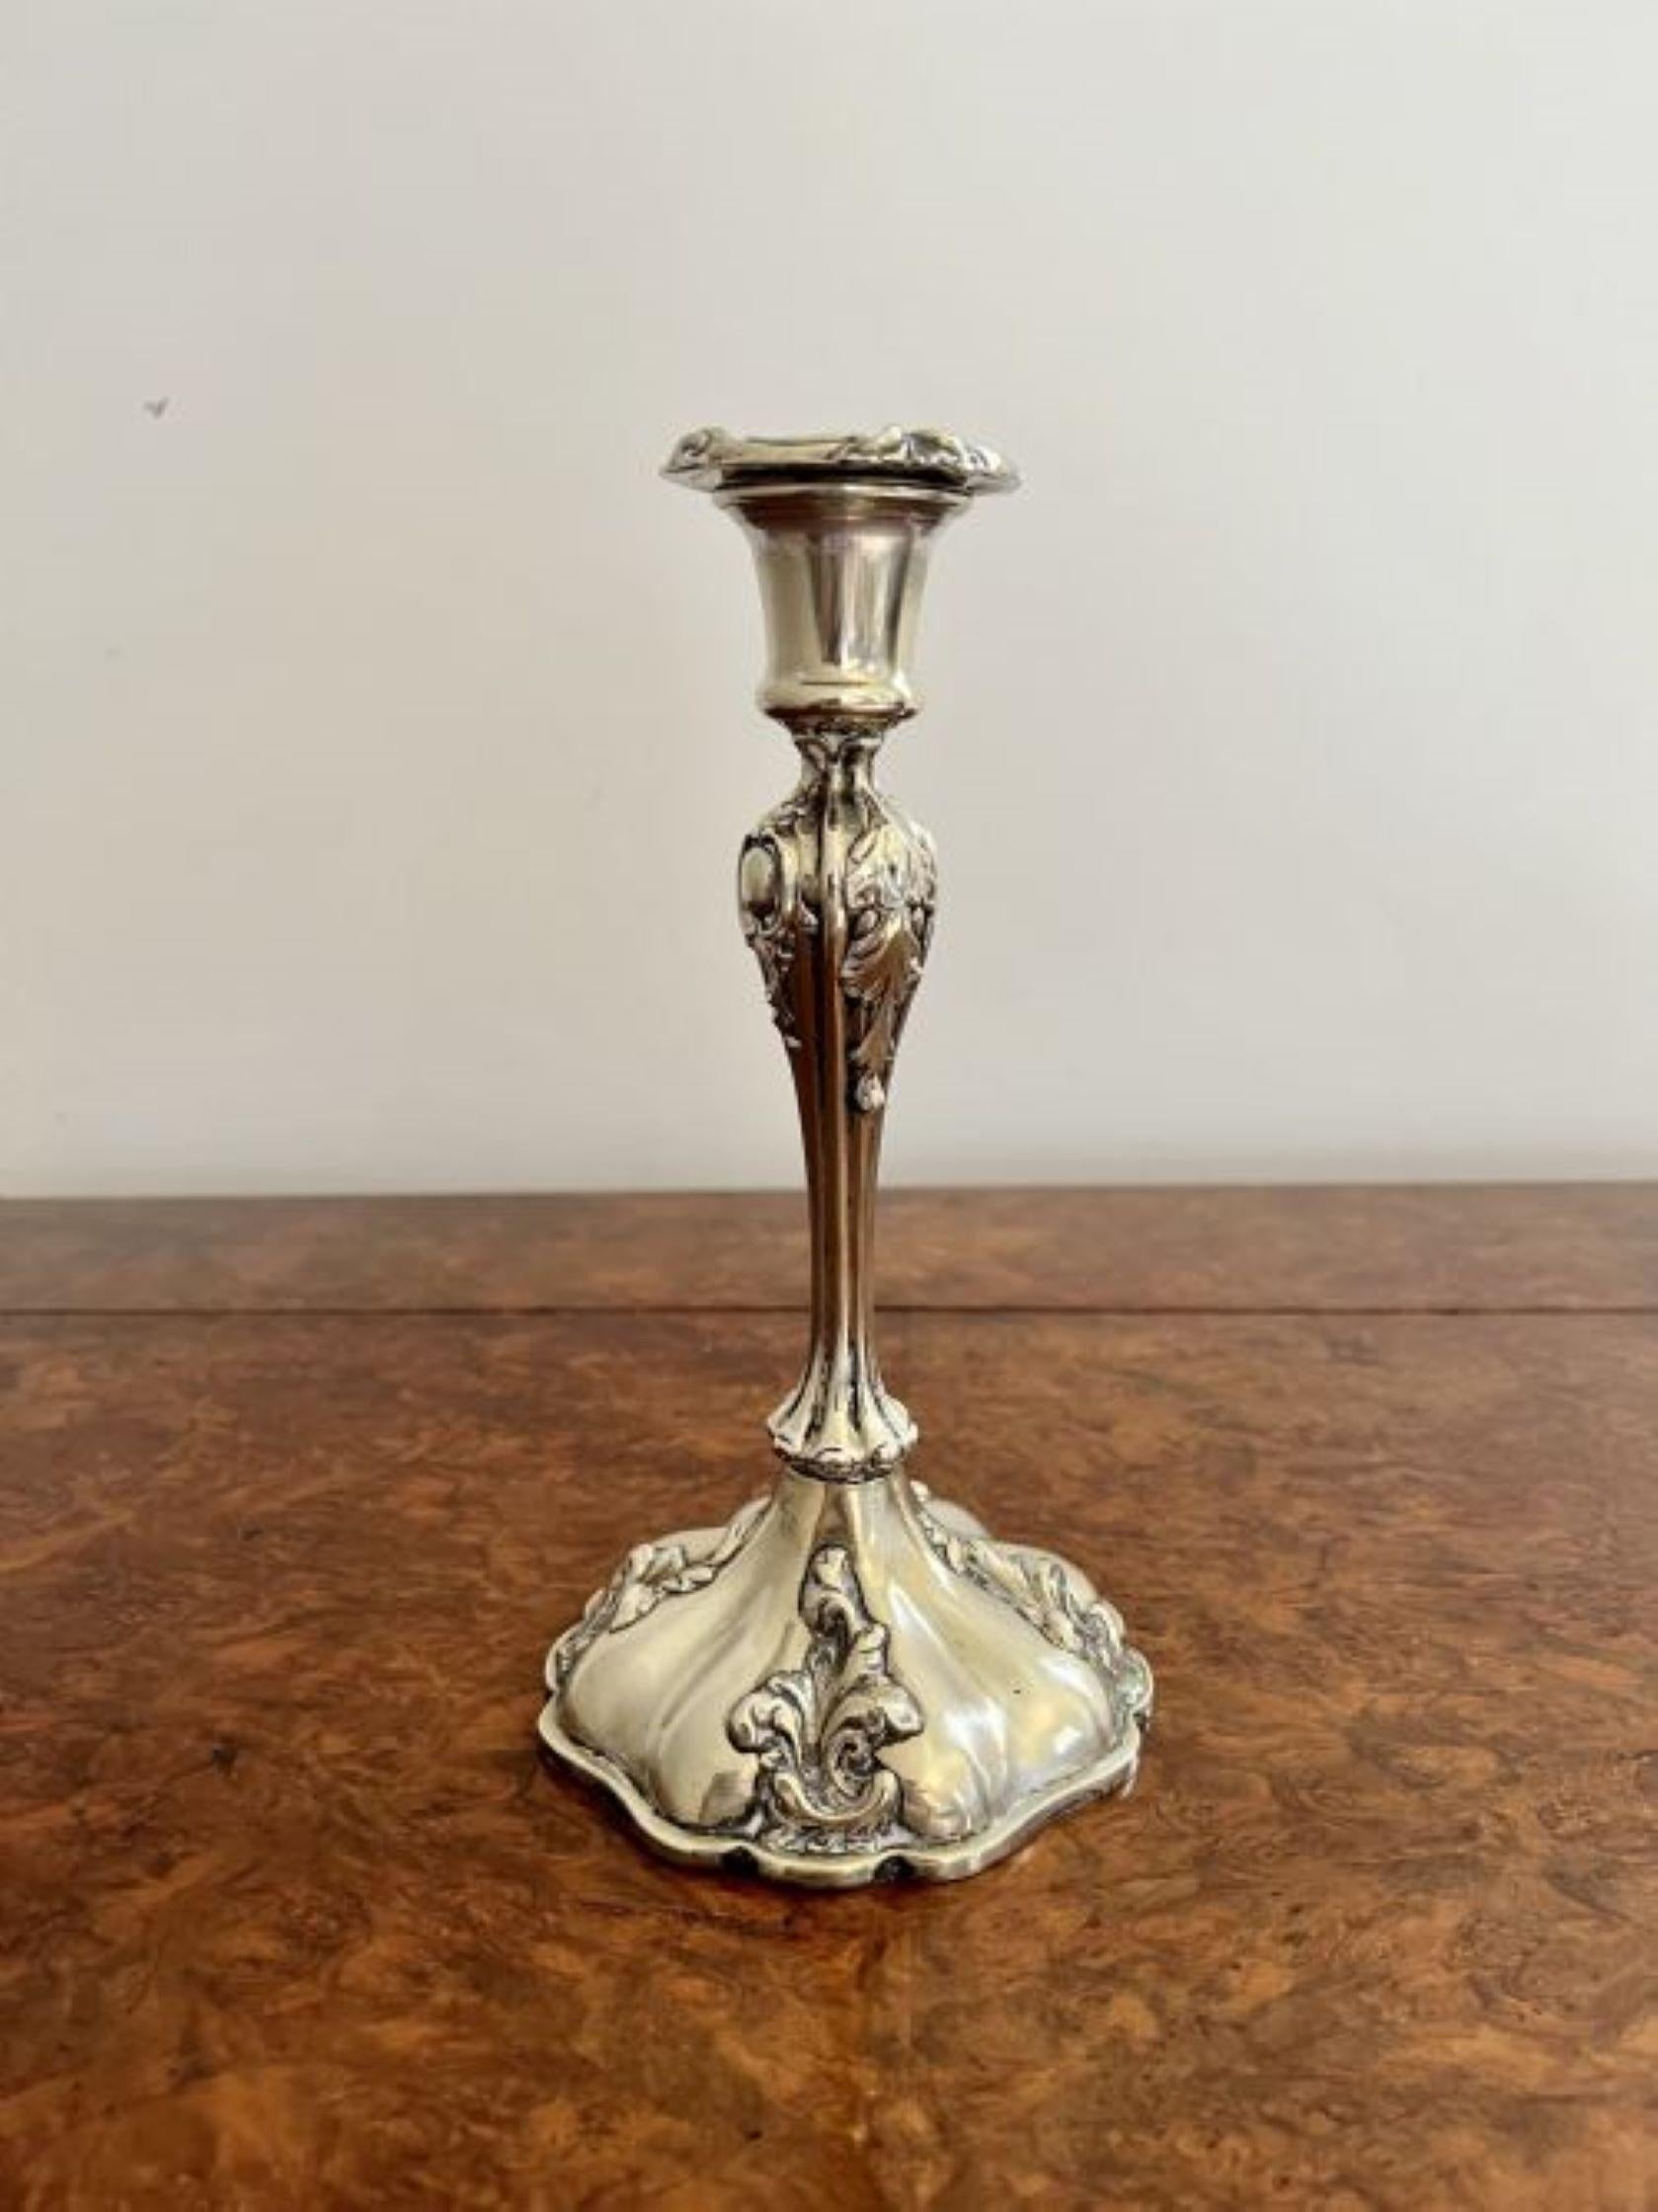 Quality pair of antique silver plated ornate candlesticks having a lovely ornate shaped candlestick standing on a ornate shaped base 